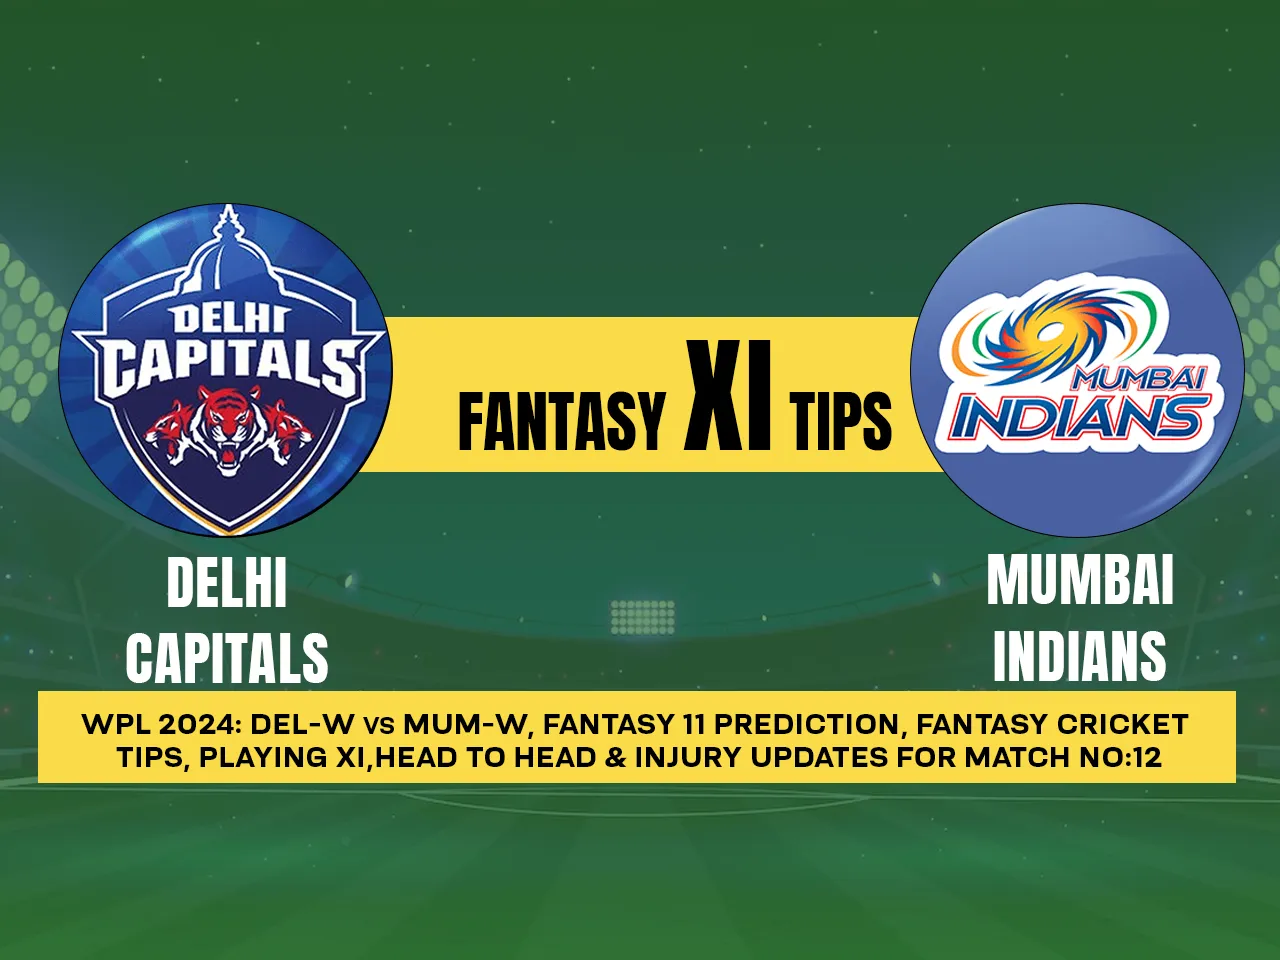 WPL 2024: DEL-W vs MUM-W Dream11 Prediction, Playing XI, Head-to-Head Stats, and Pitch Report for 12th Match